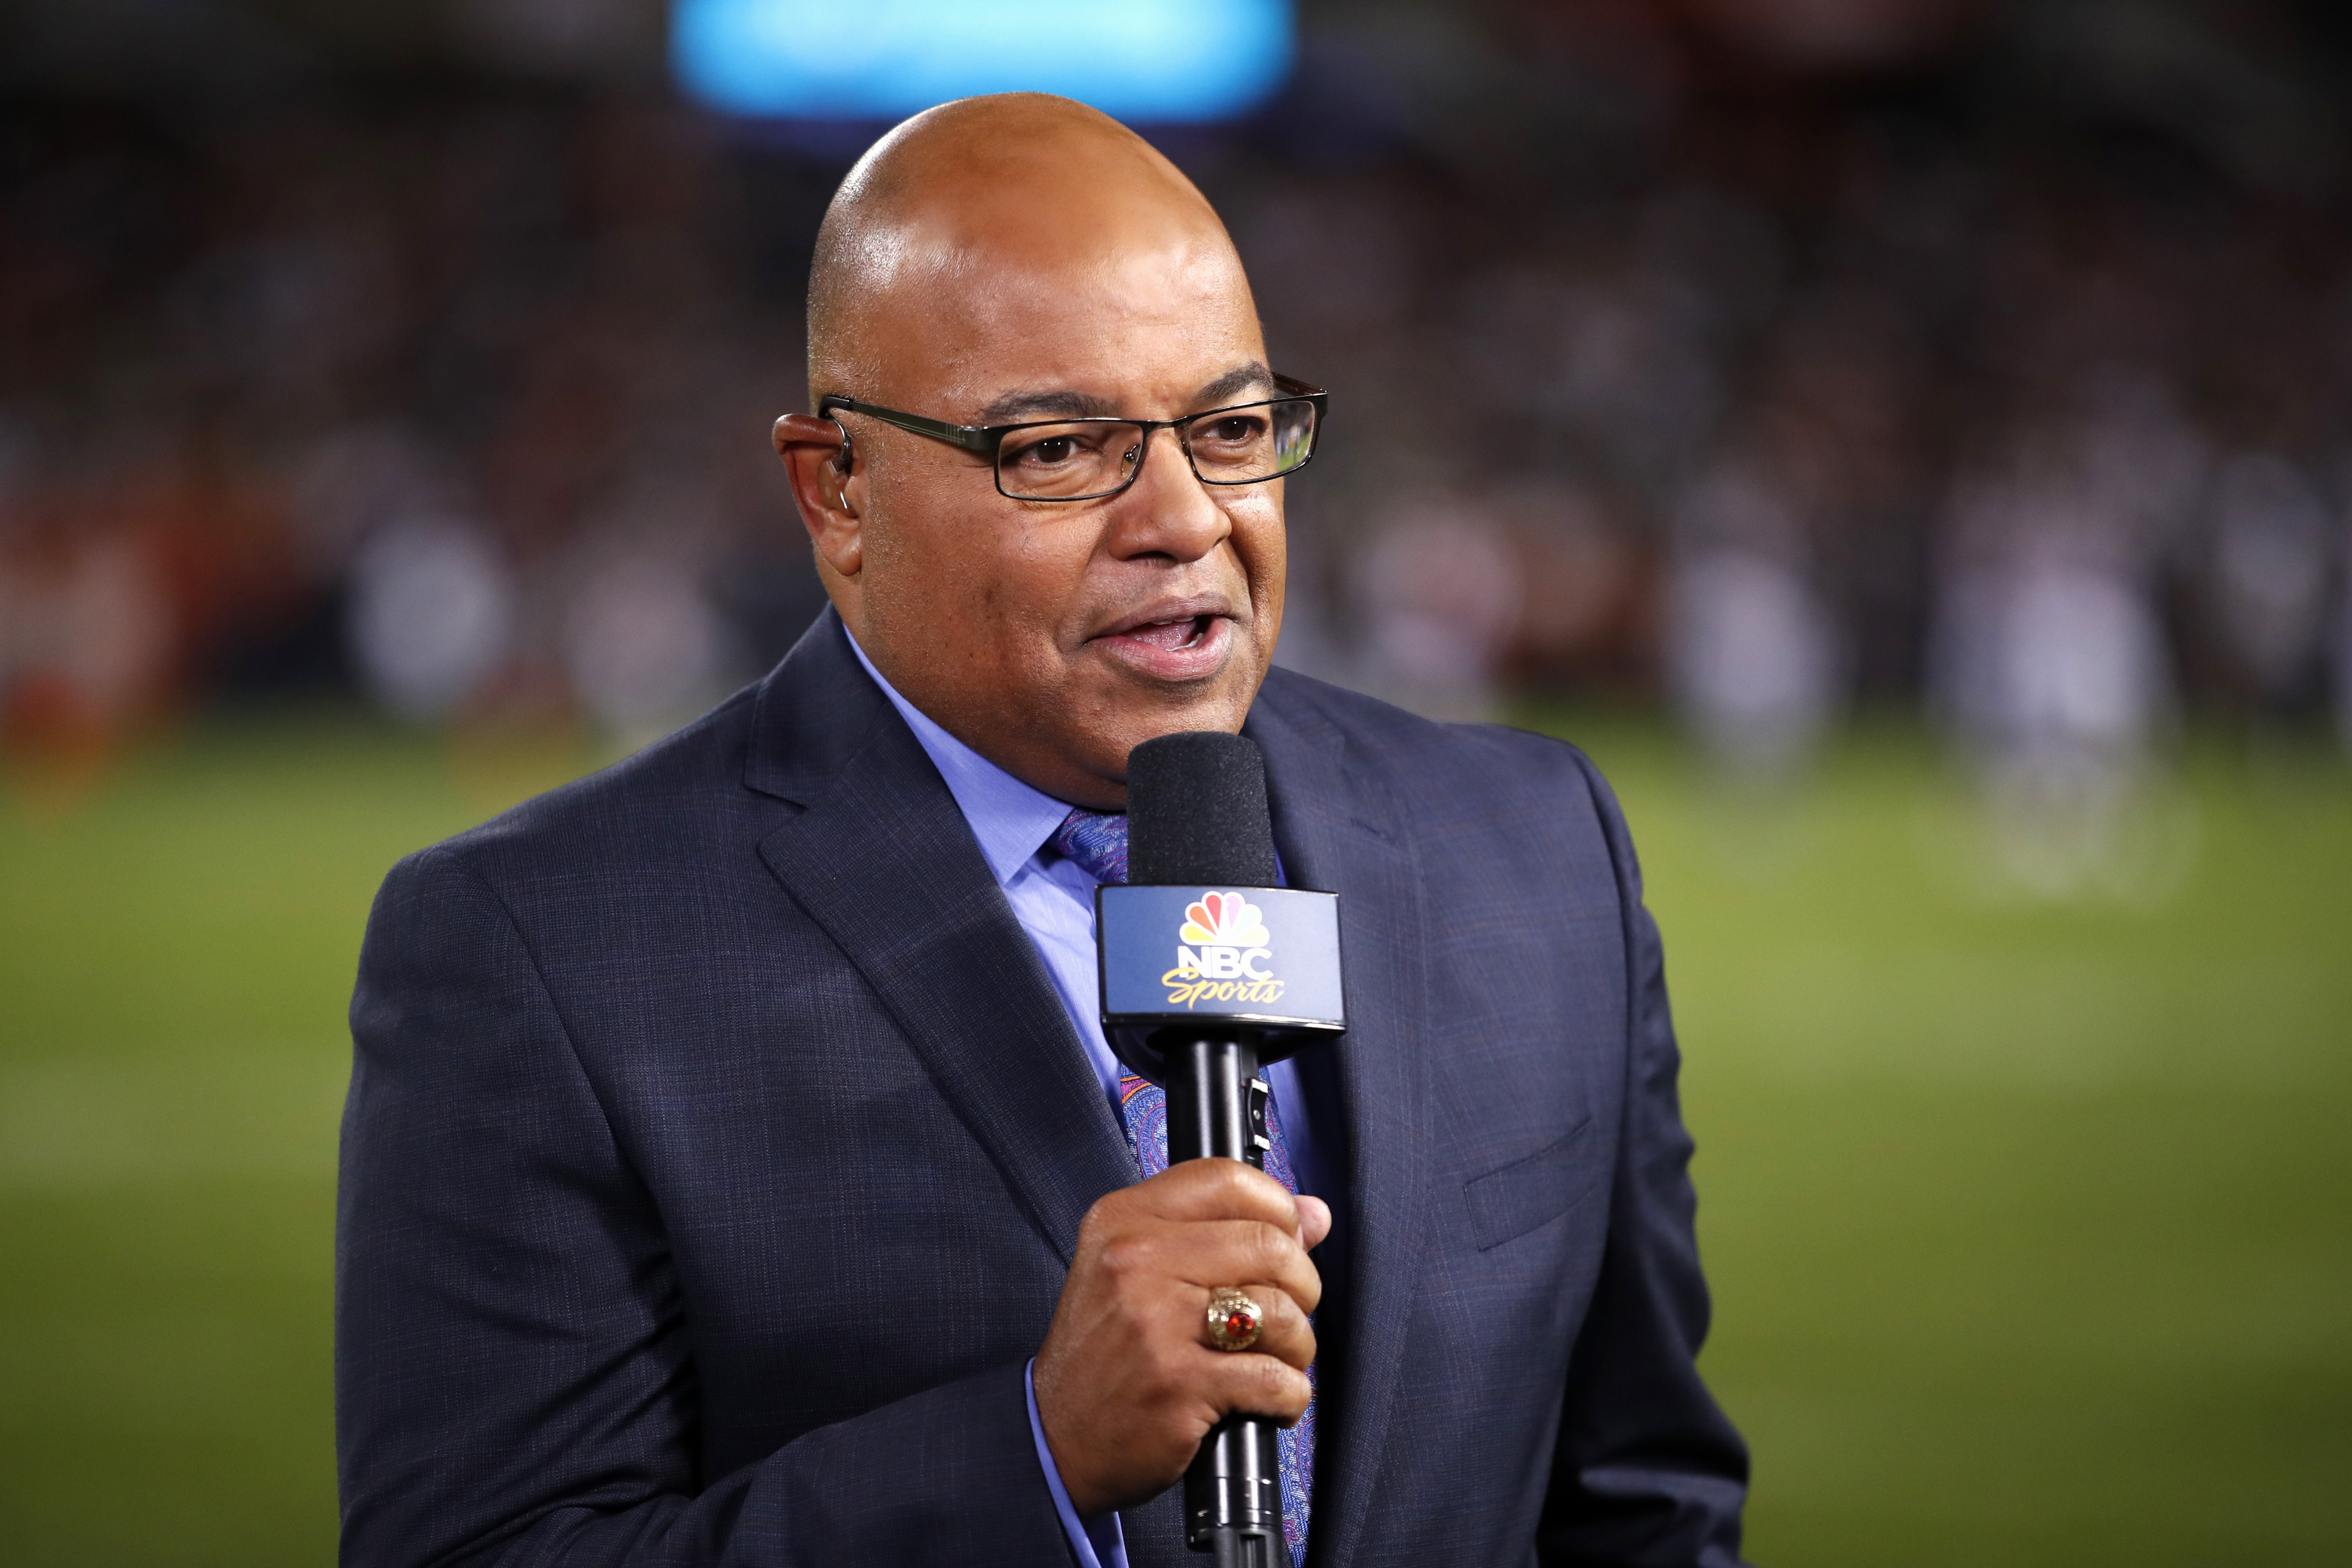 Double Duty: Tirico to Host NBC's Olympic, Super Bowl Shows